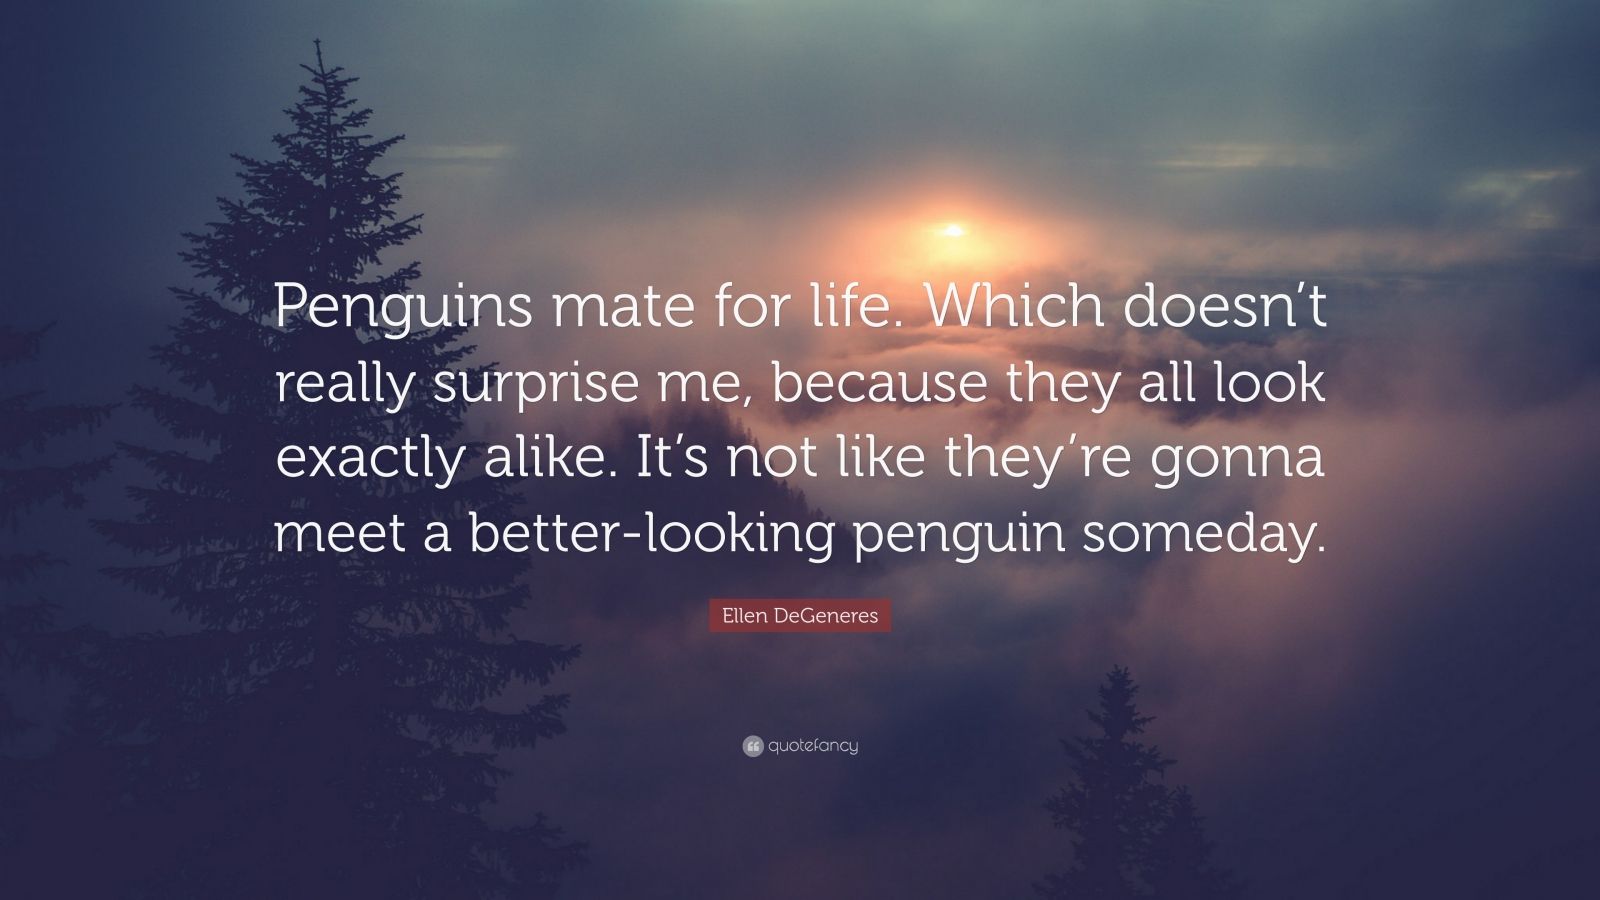 Ellen DeGeneres Quote: “Penguins mate for life. Which doesn’t really